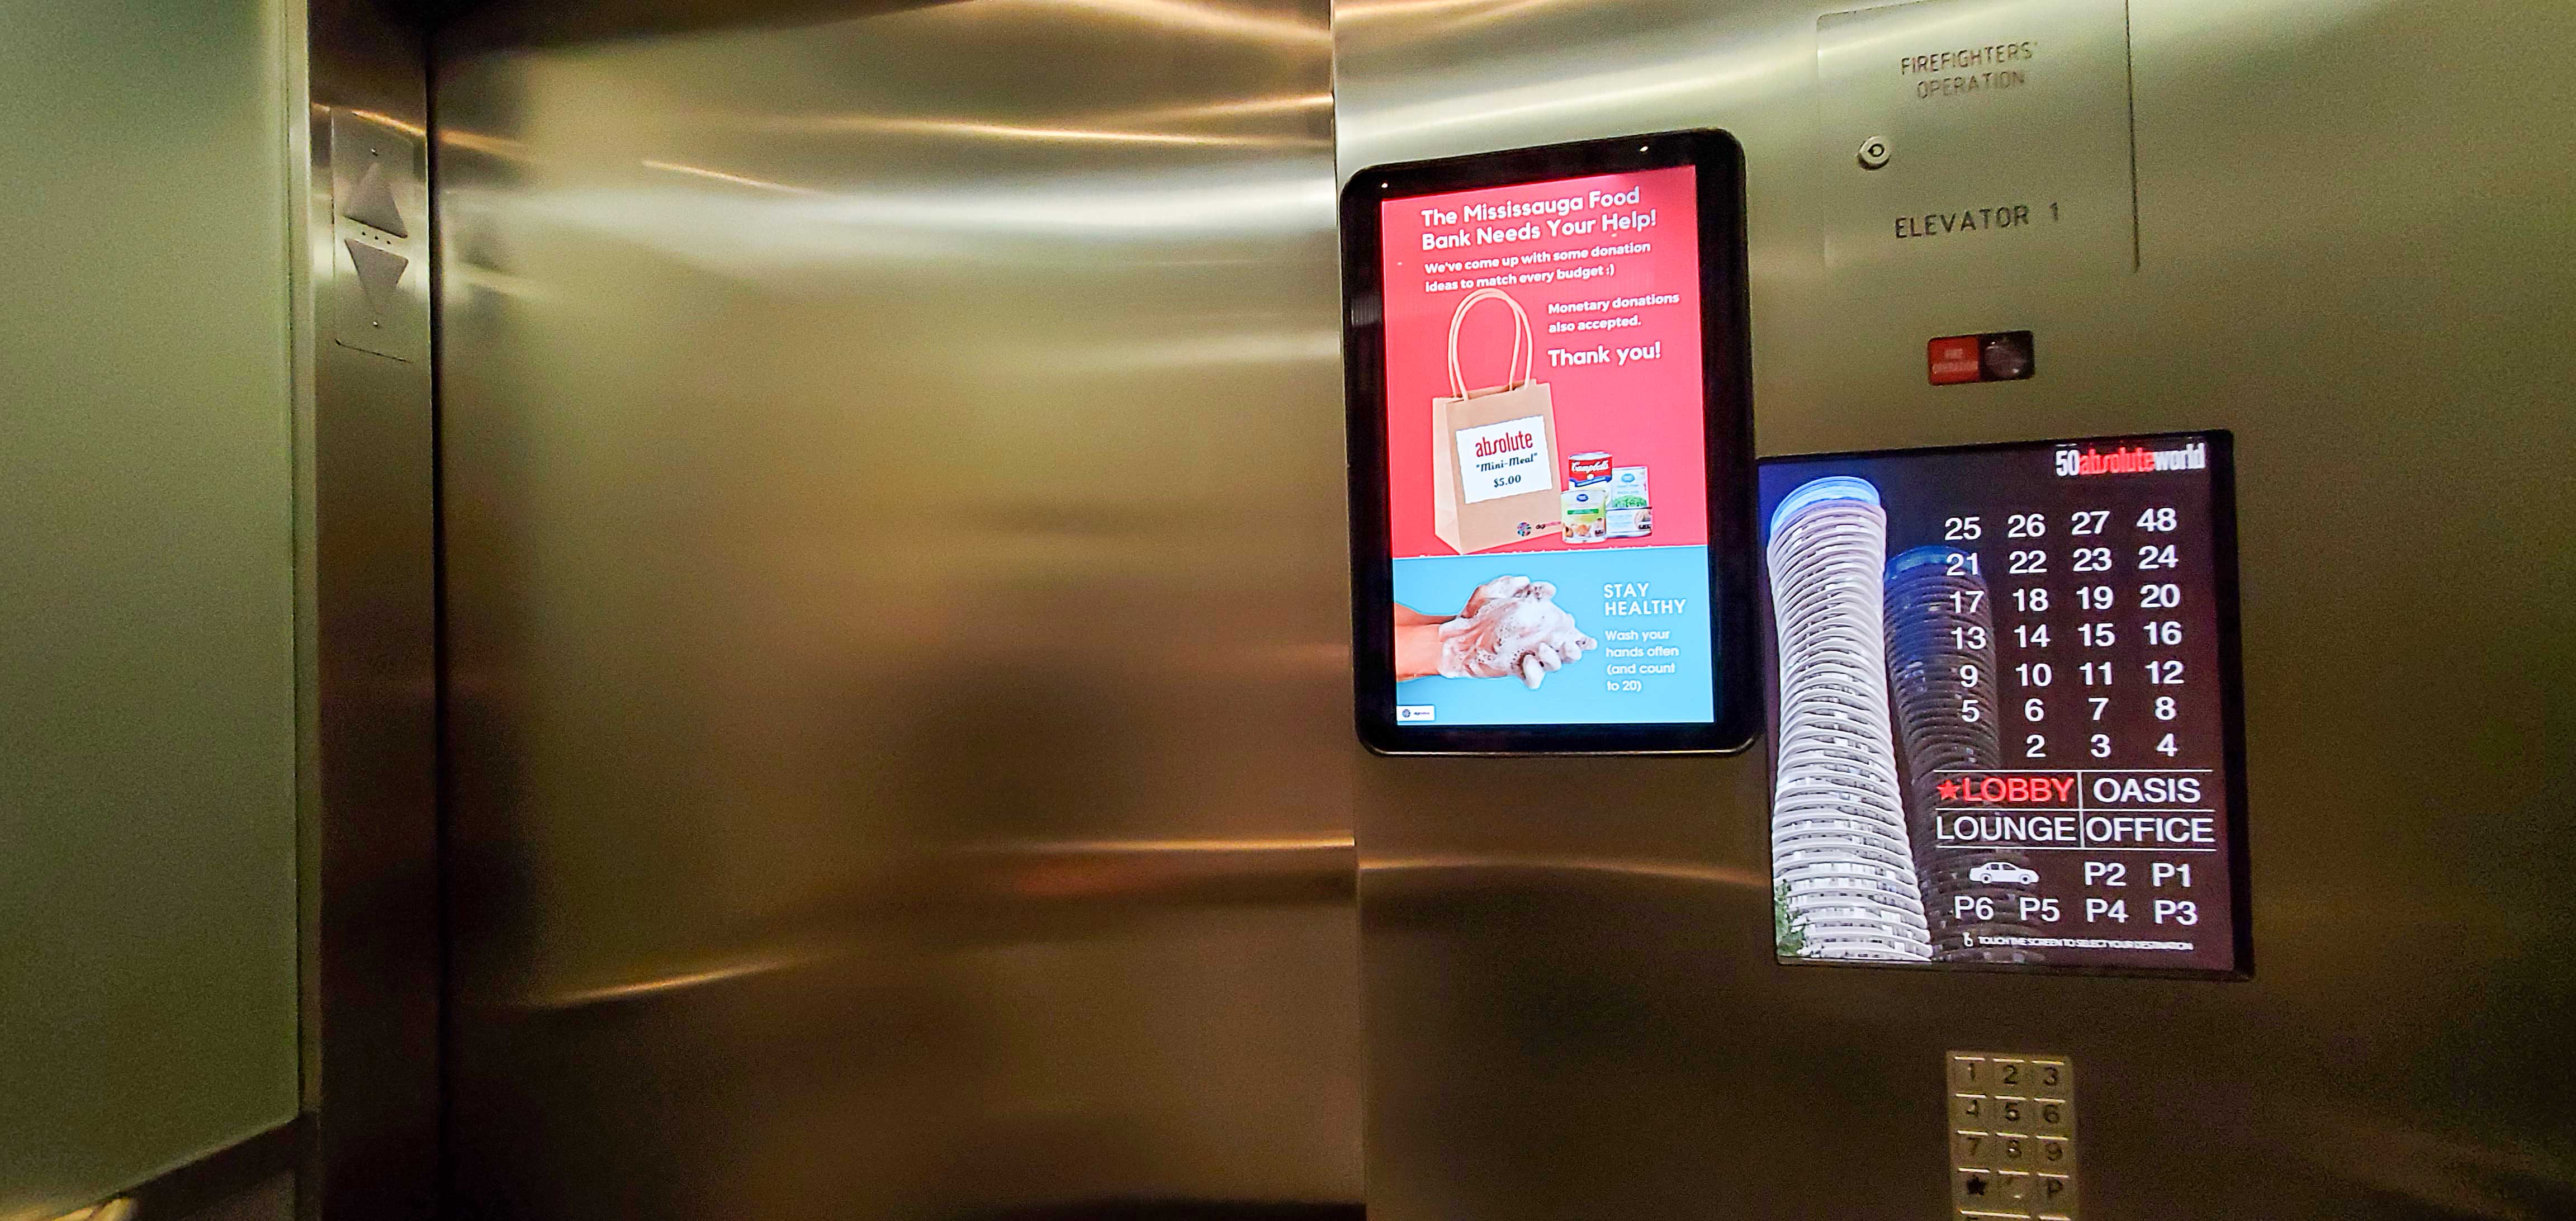 Image of elevator with touchscreen from Touch to Go Technologies and resident notice screen from DigiNotice